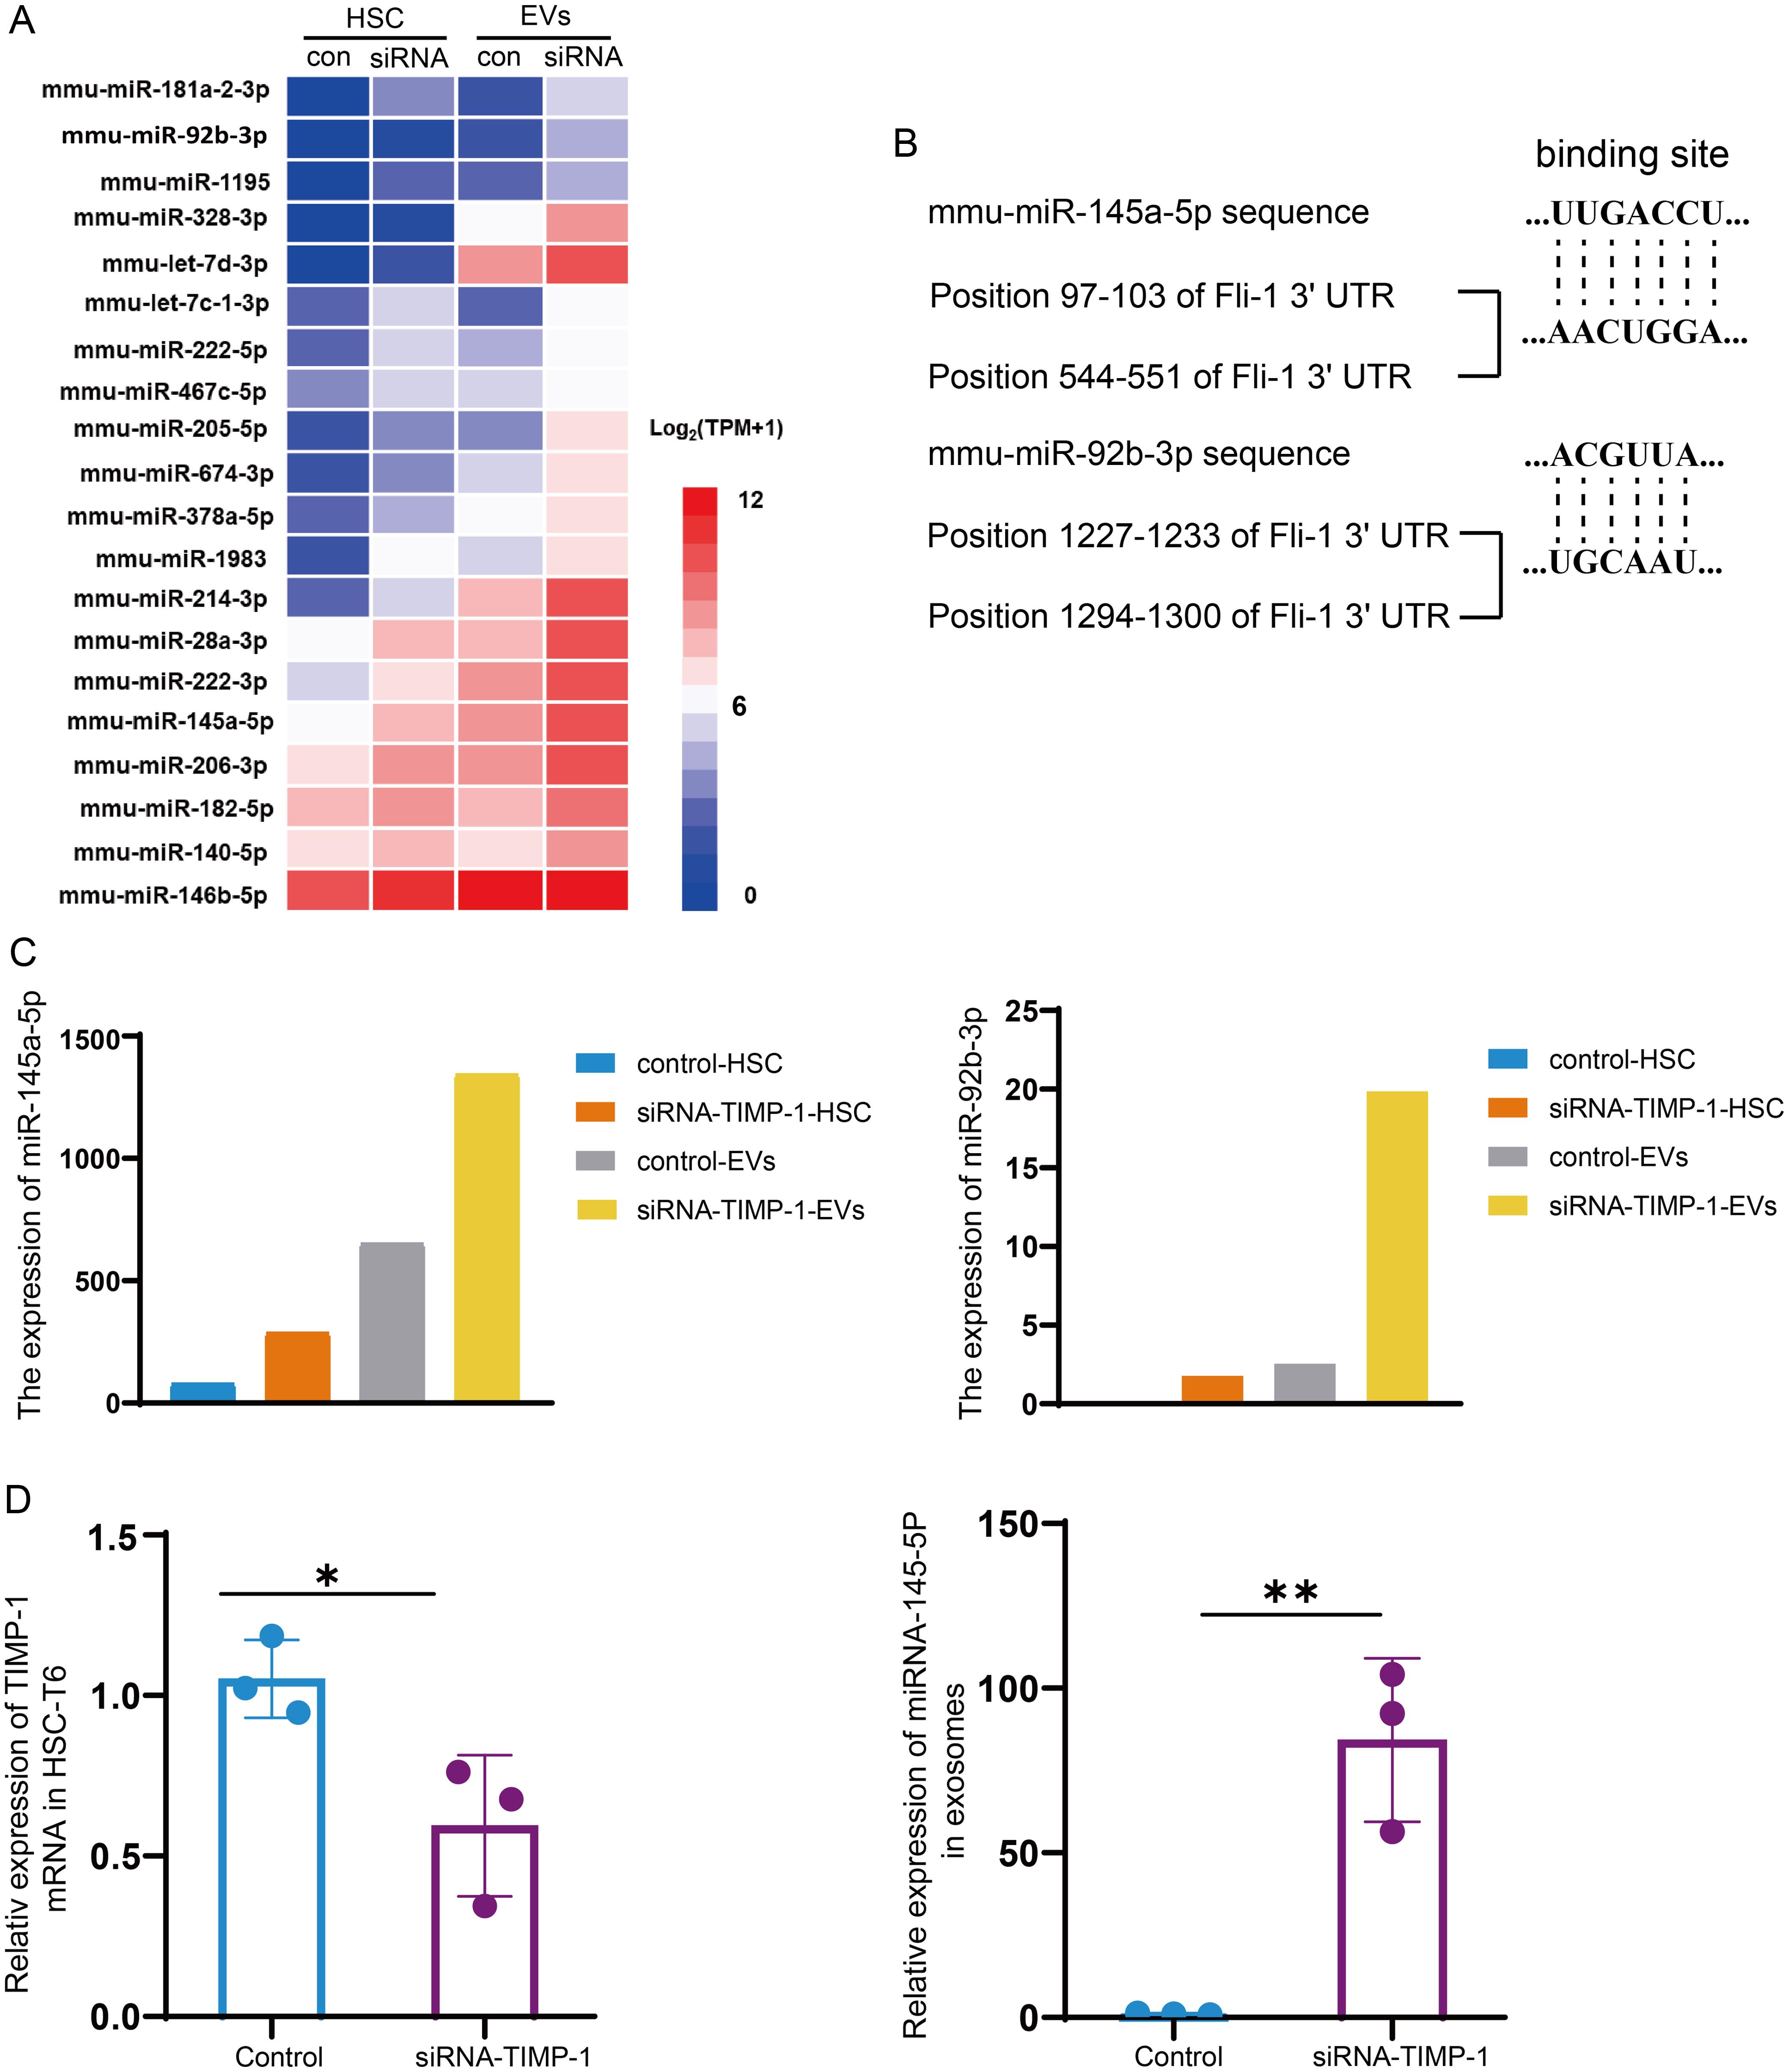 Comparison of HSC- and EV-derived miRNAs’ signatures between NC and siRNA-TIMP-1 treated HSCs.